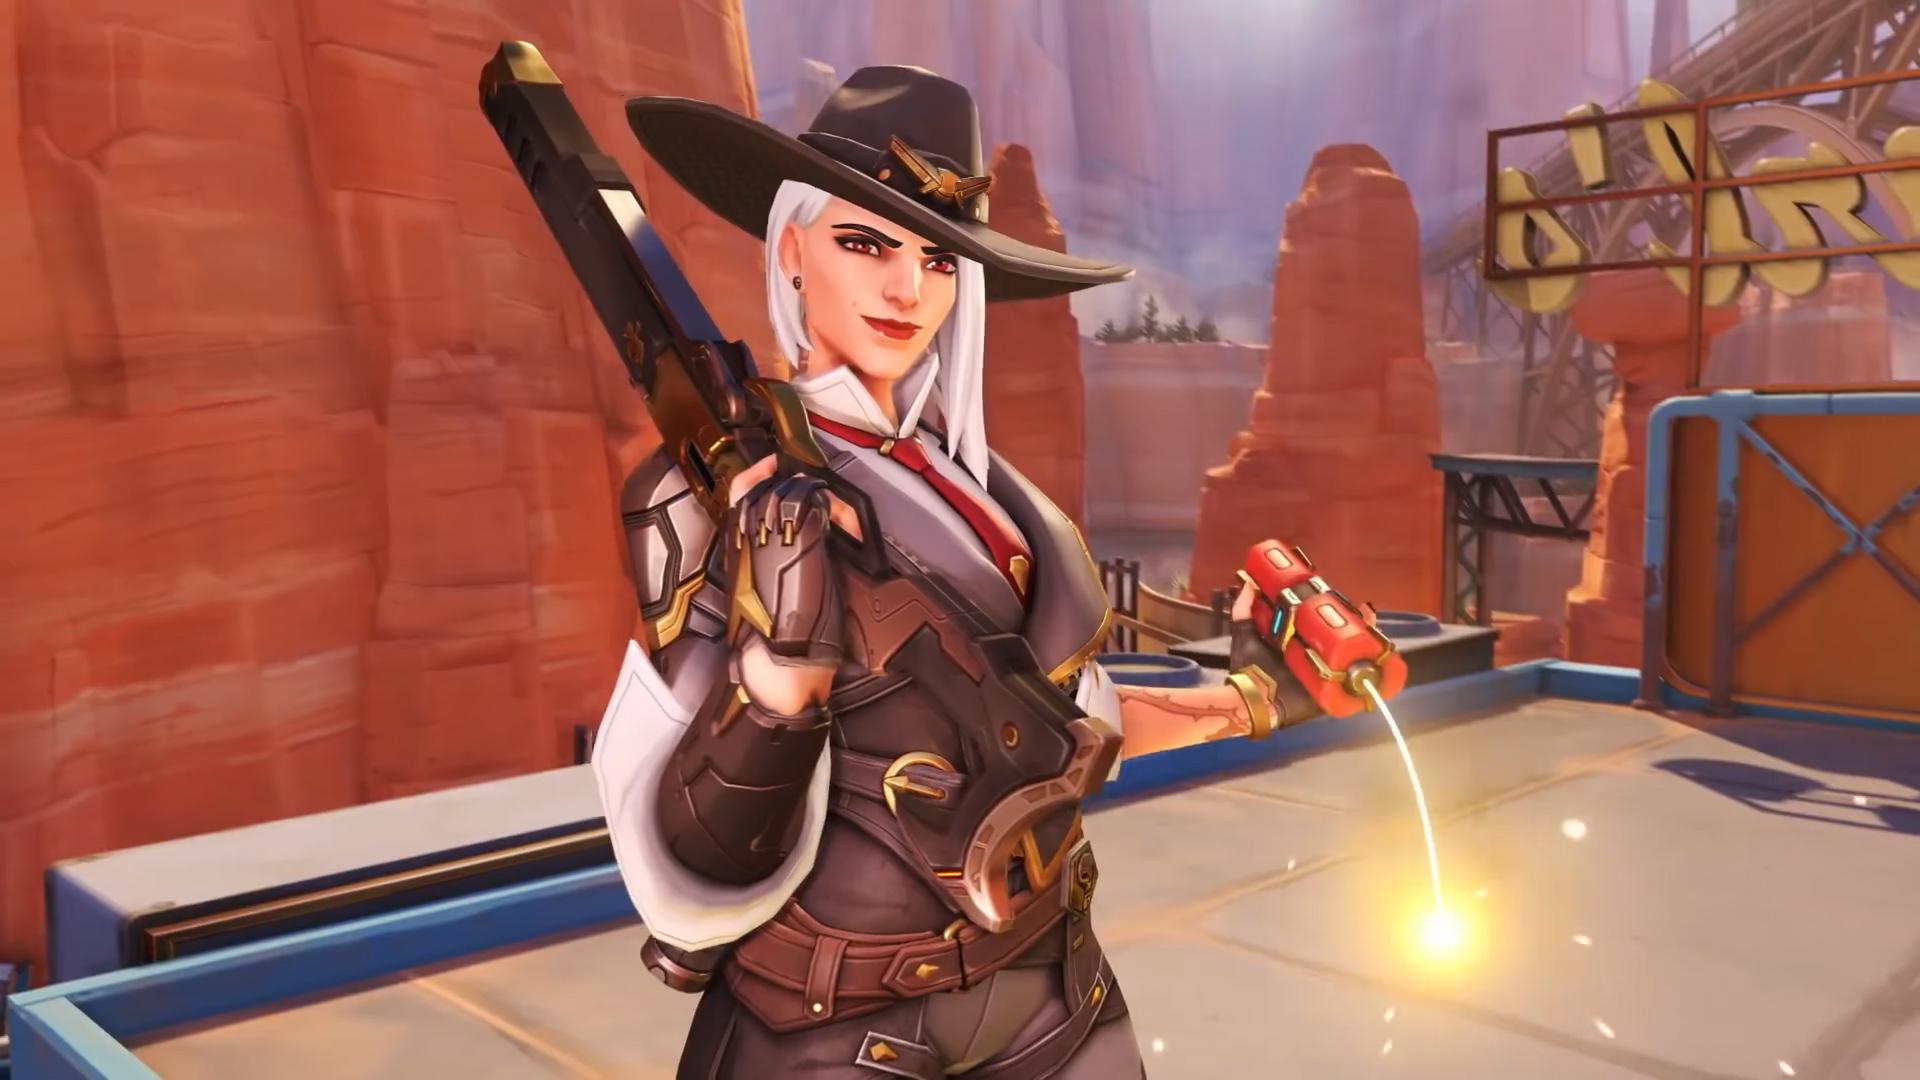 Overwatch Ashe gameplay makes her seem tricky but rewarding